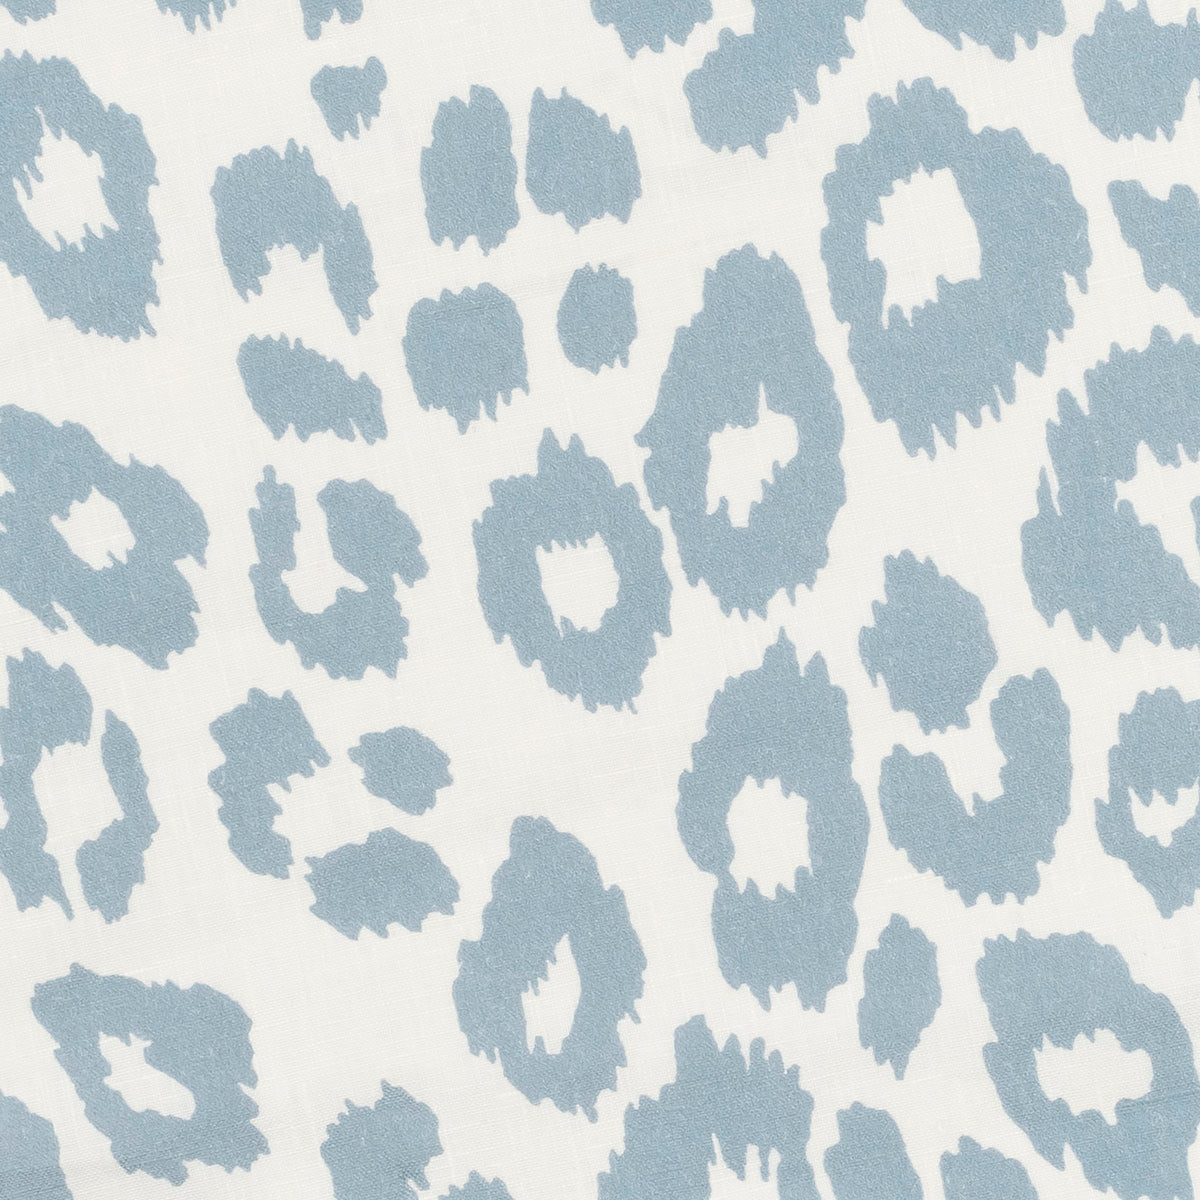 Swatch Sample of Matouk Schumacher Iconic Leopard Table Linens in Color Sky